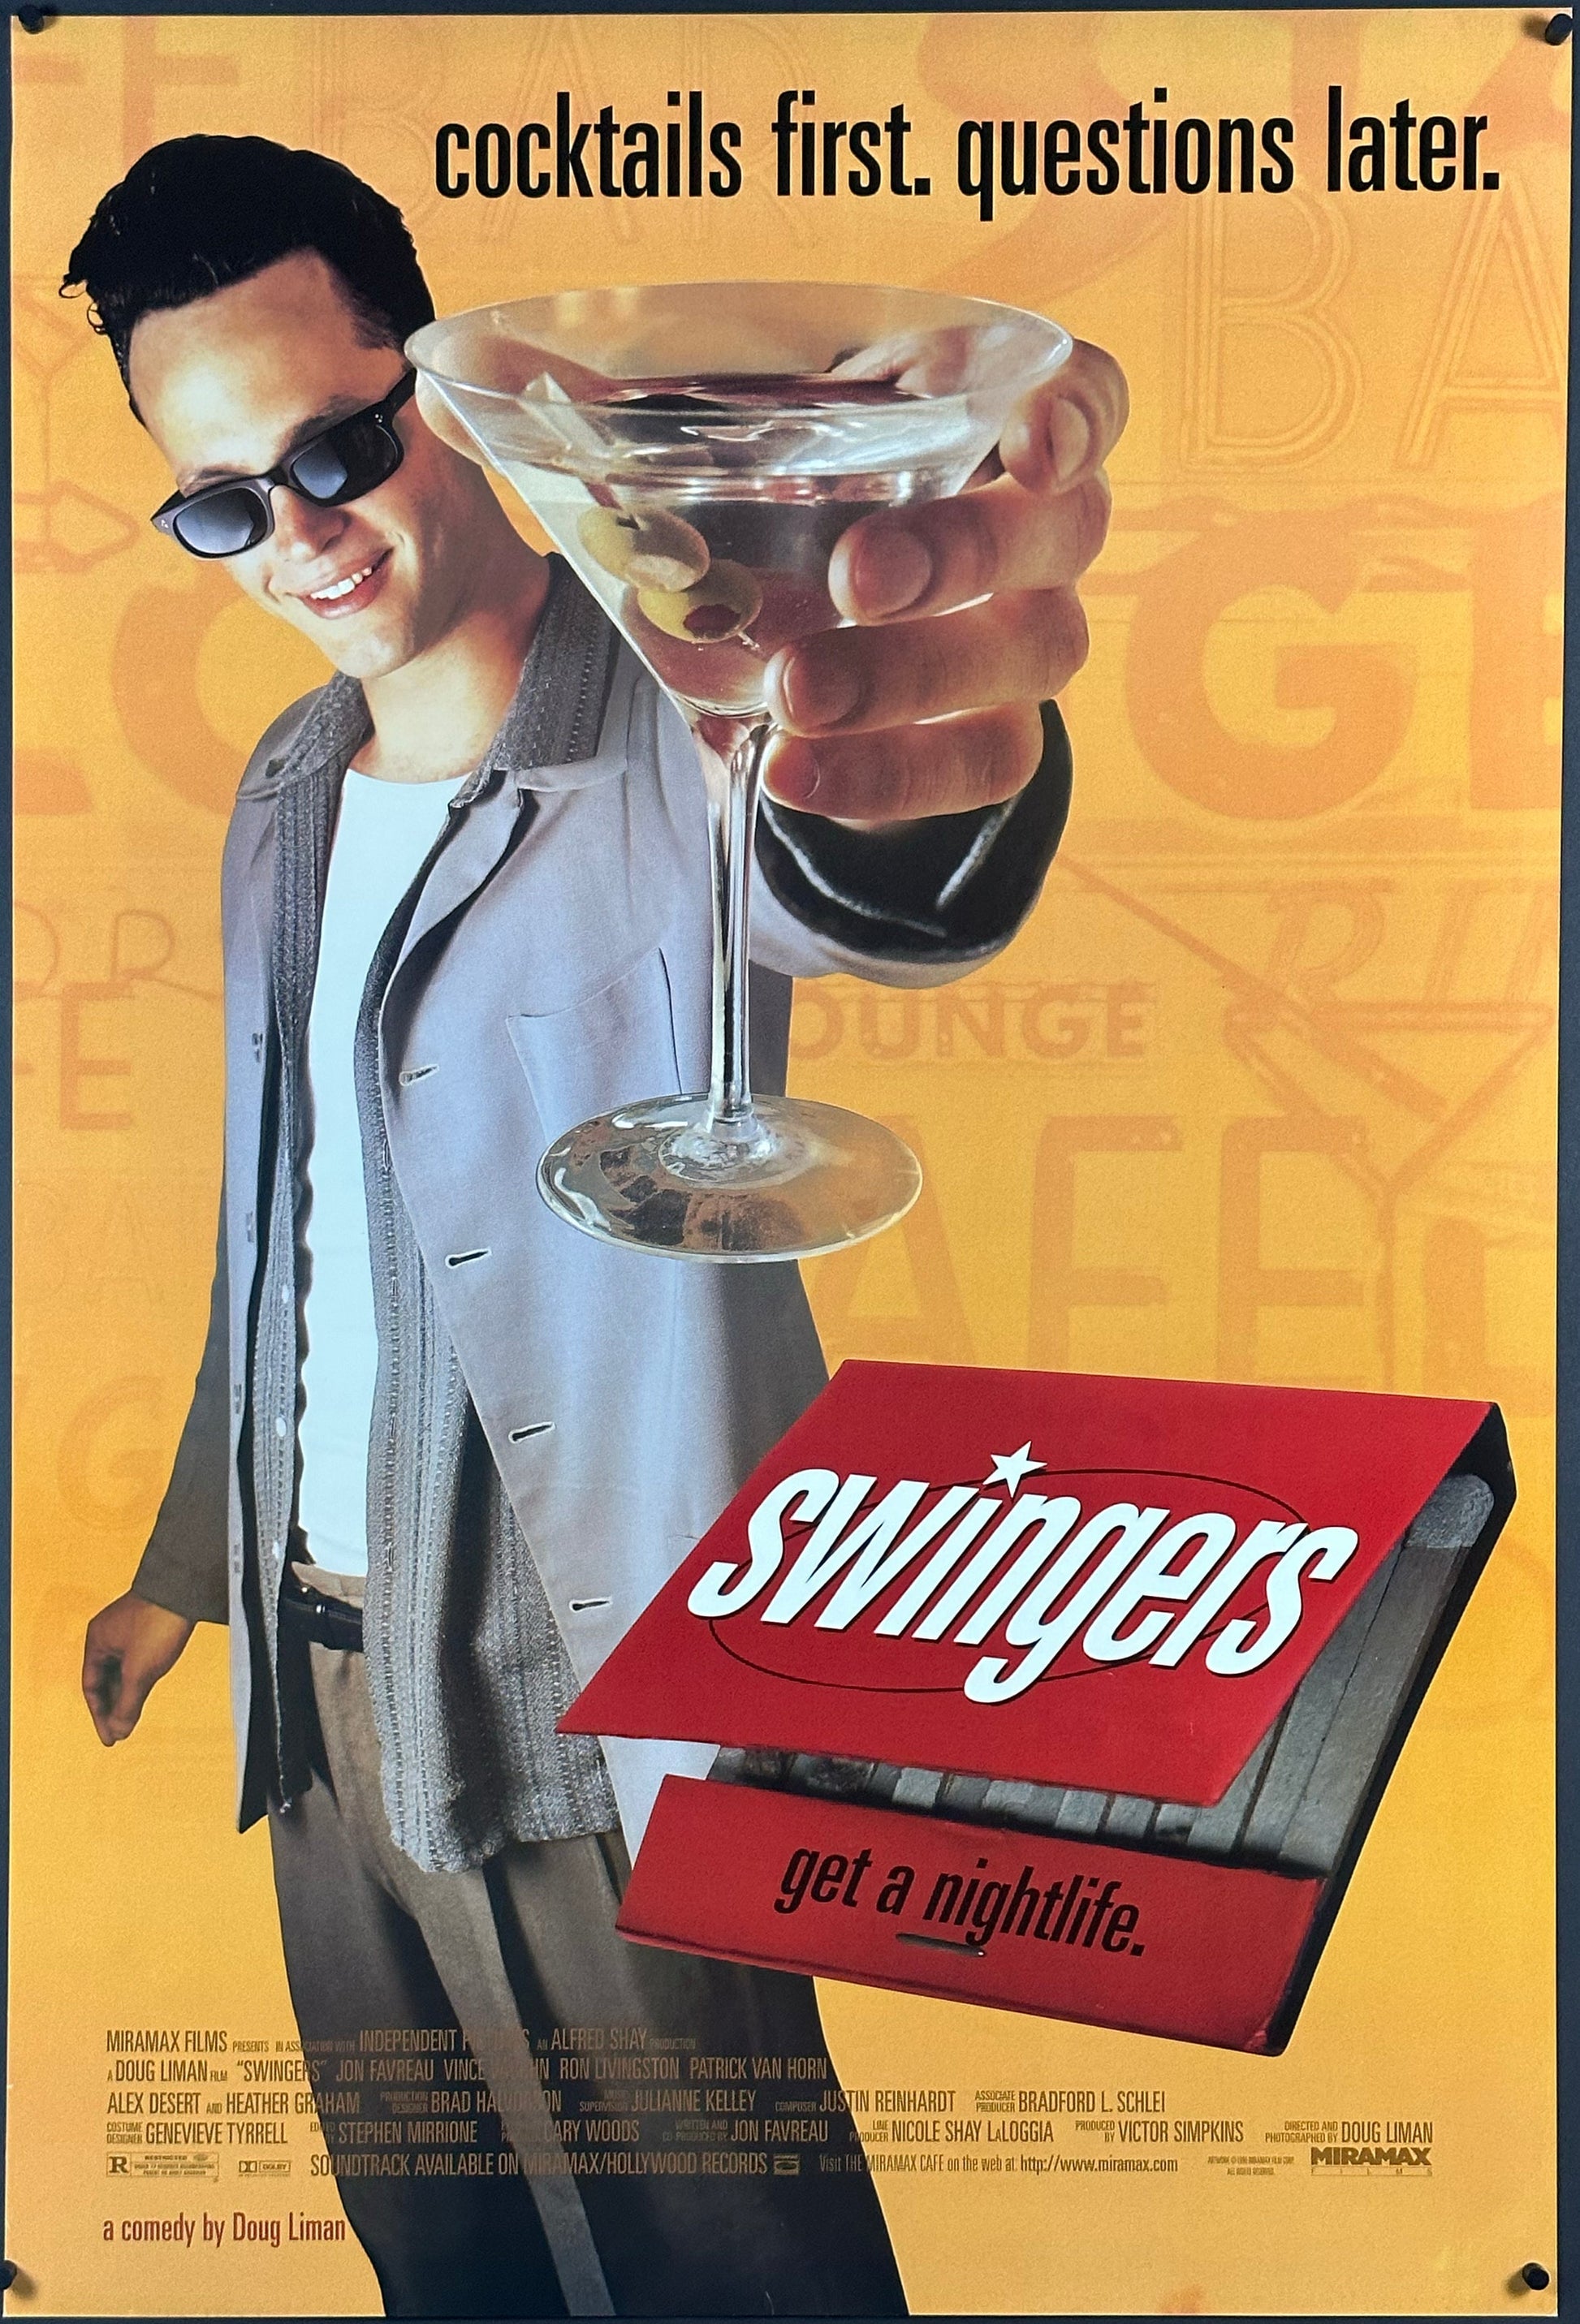 Swingers - posterpalace.com